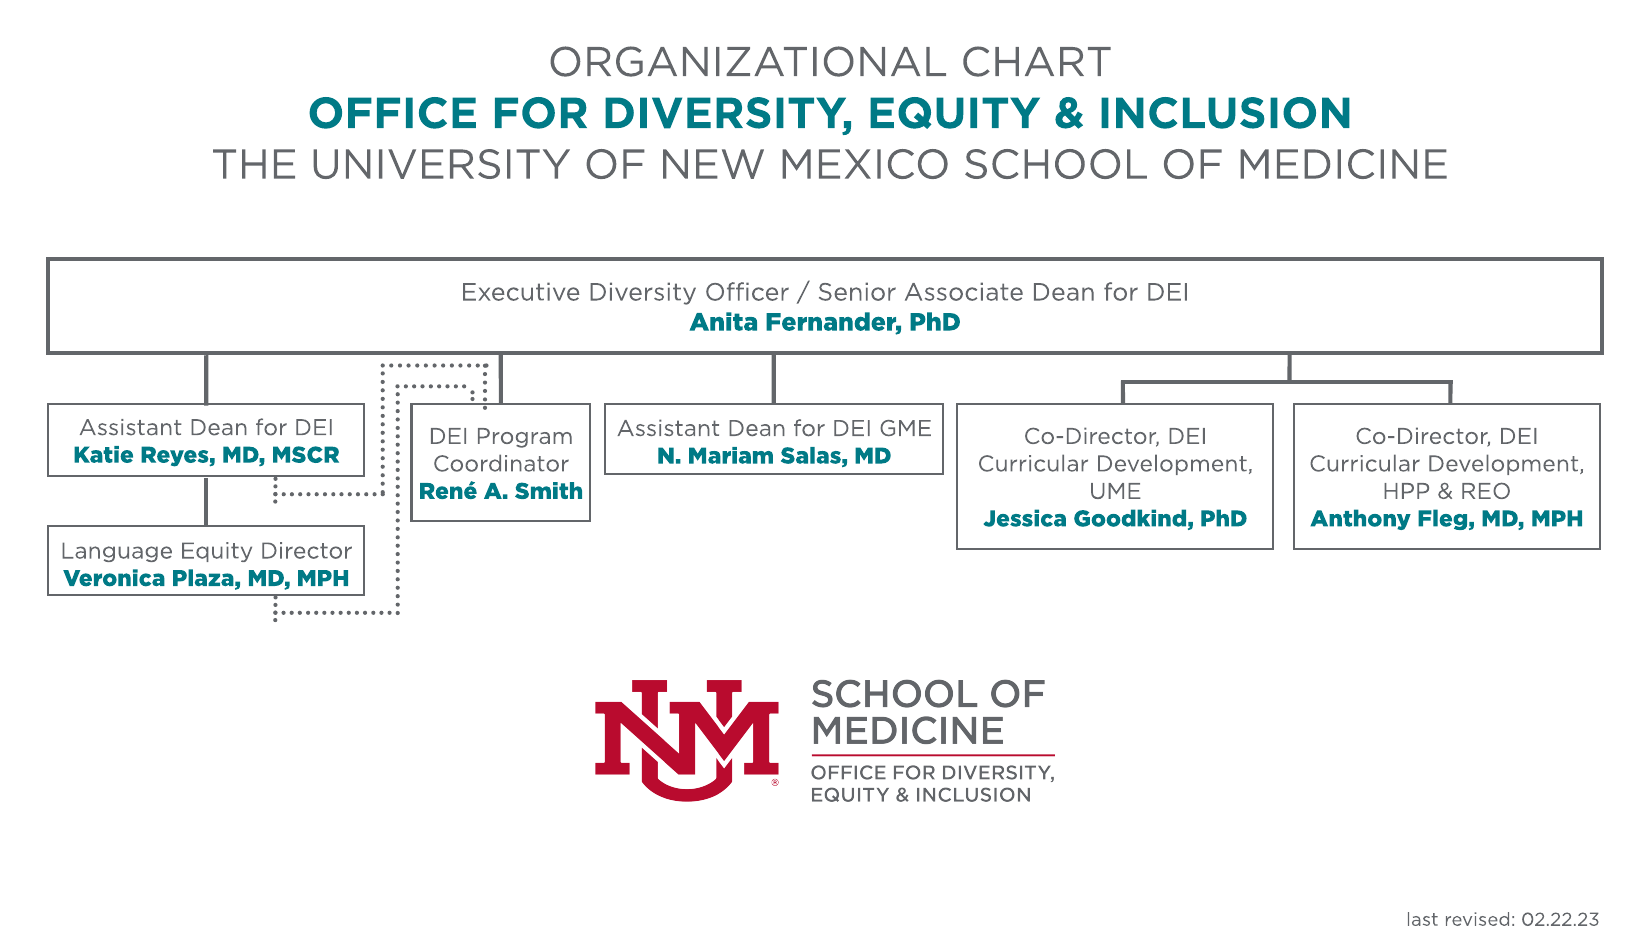 organization chart of the UNM School of Medicine Office for Diversity, Equity & Inclusion